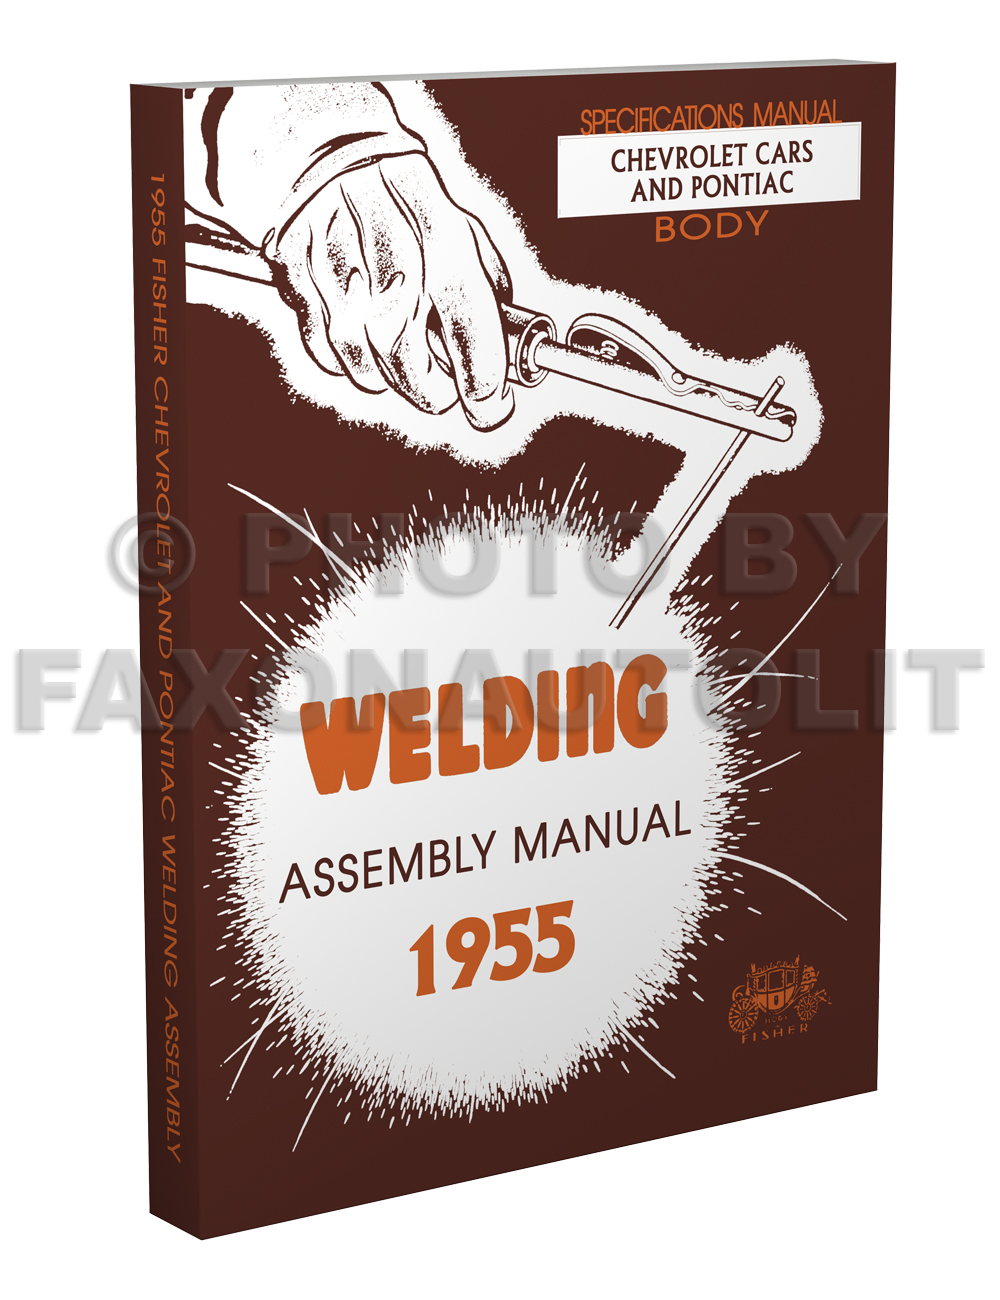 1955 Chevrolet and Pontiac Fisher Body Welding Assembly Manual Reprint